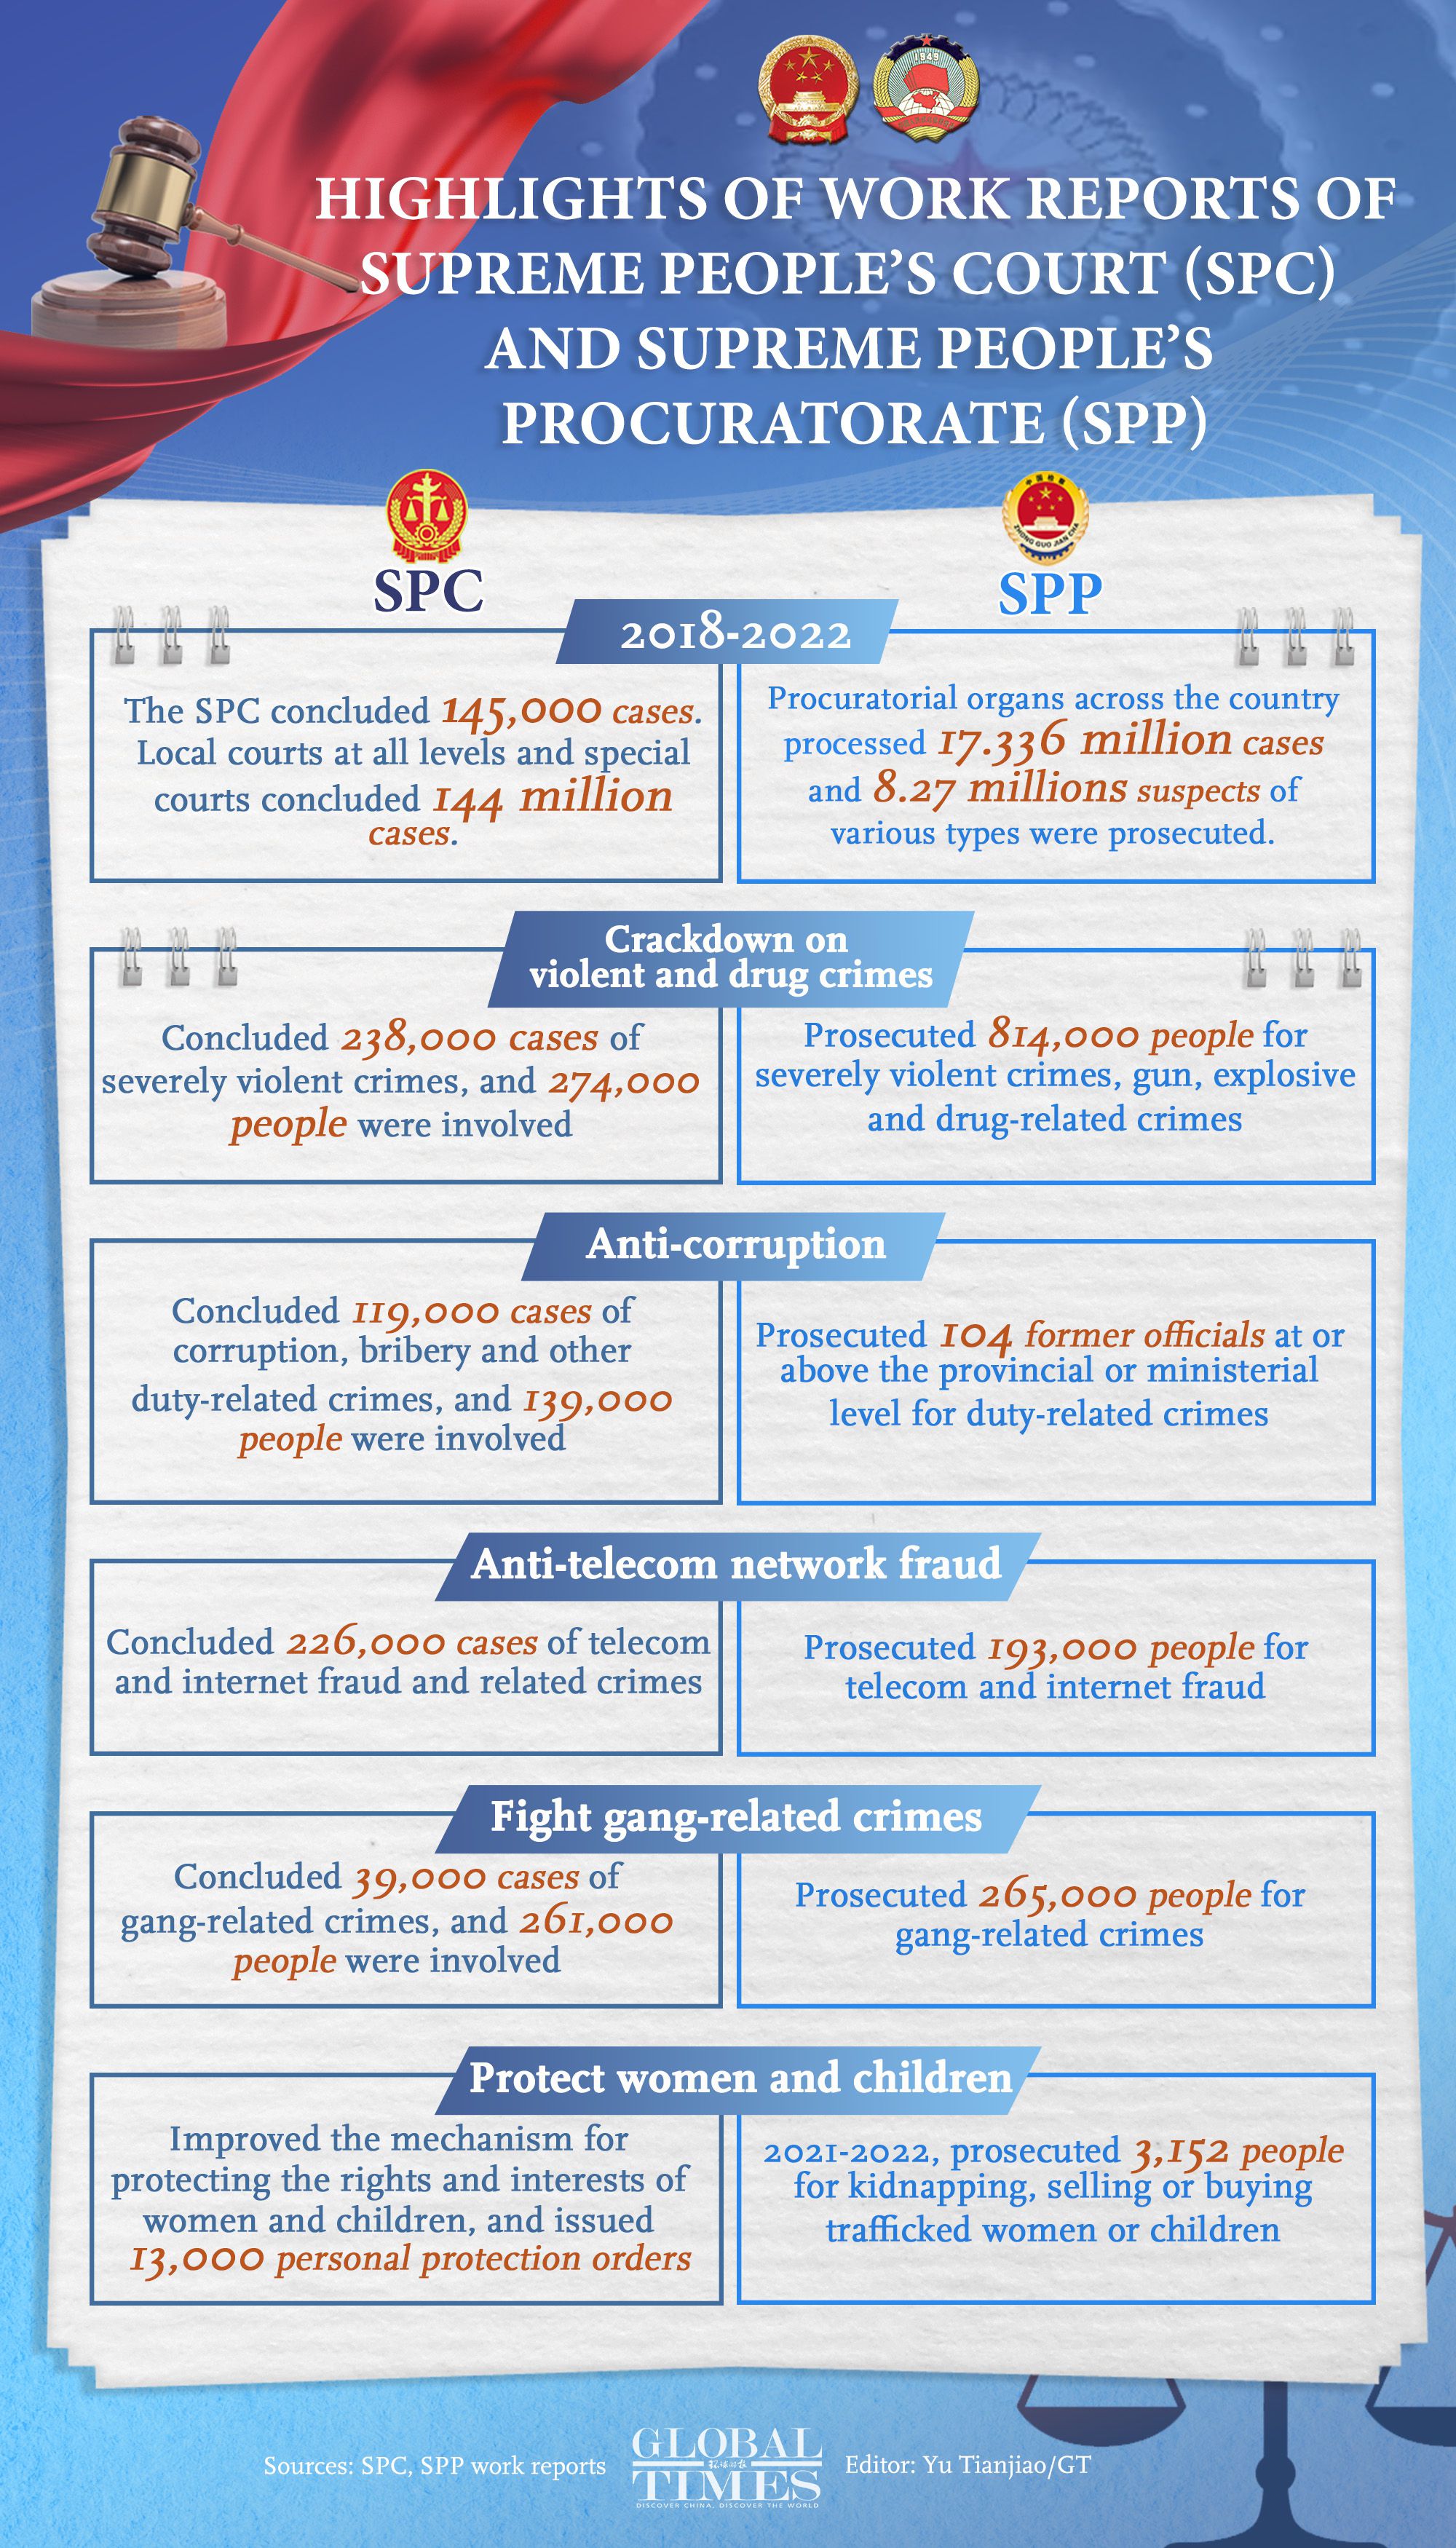 Highlights of work reports of Supreme People’s Court (SPC) and Supreme People’s Procuratorate (SPP)